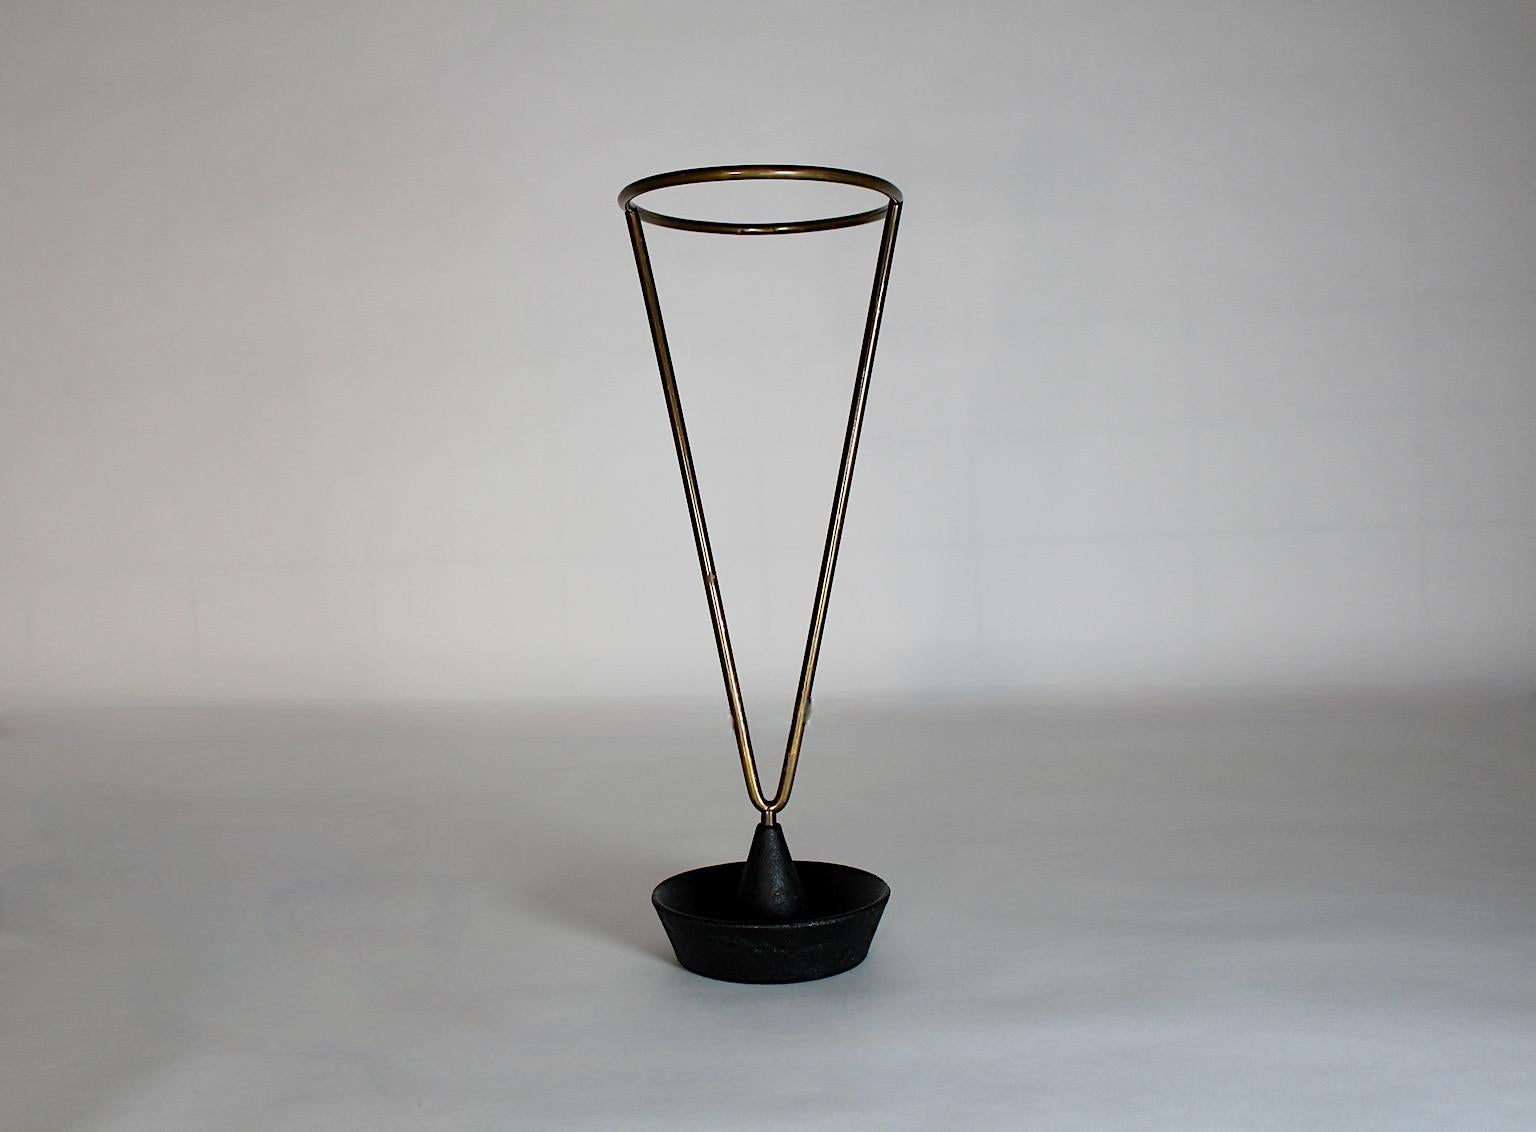 Modernist vintage authentic umbrella stand or cane holder from brass and black iron by Carl Auböck for Werkstätte Auböck 1950s Austria.
An iconic umbrella stand model number 4293 by Carl Auböck from the 1950s
with beautiful desirable brass patina,